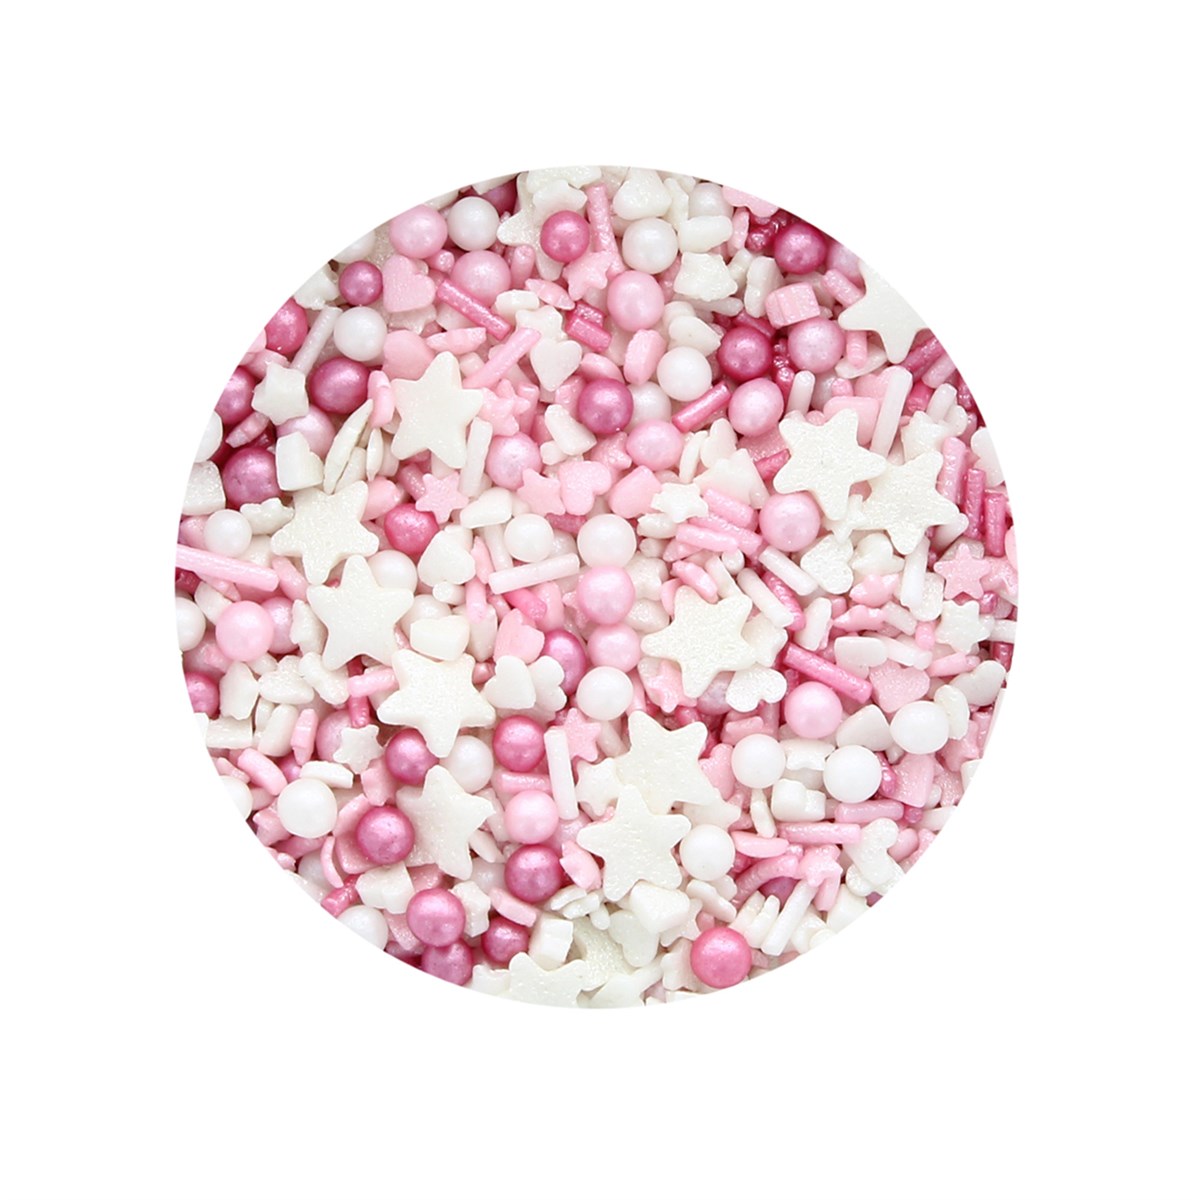 Edible Assorted Cake Sprinkles - Pink Mix 75 grams